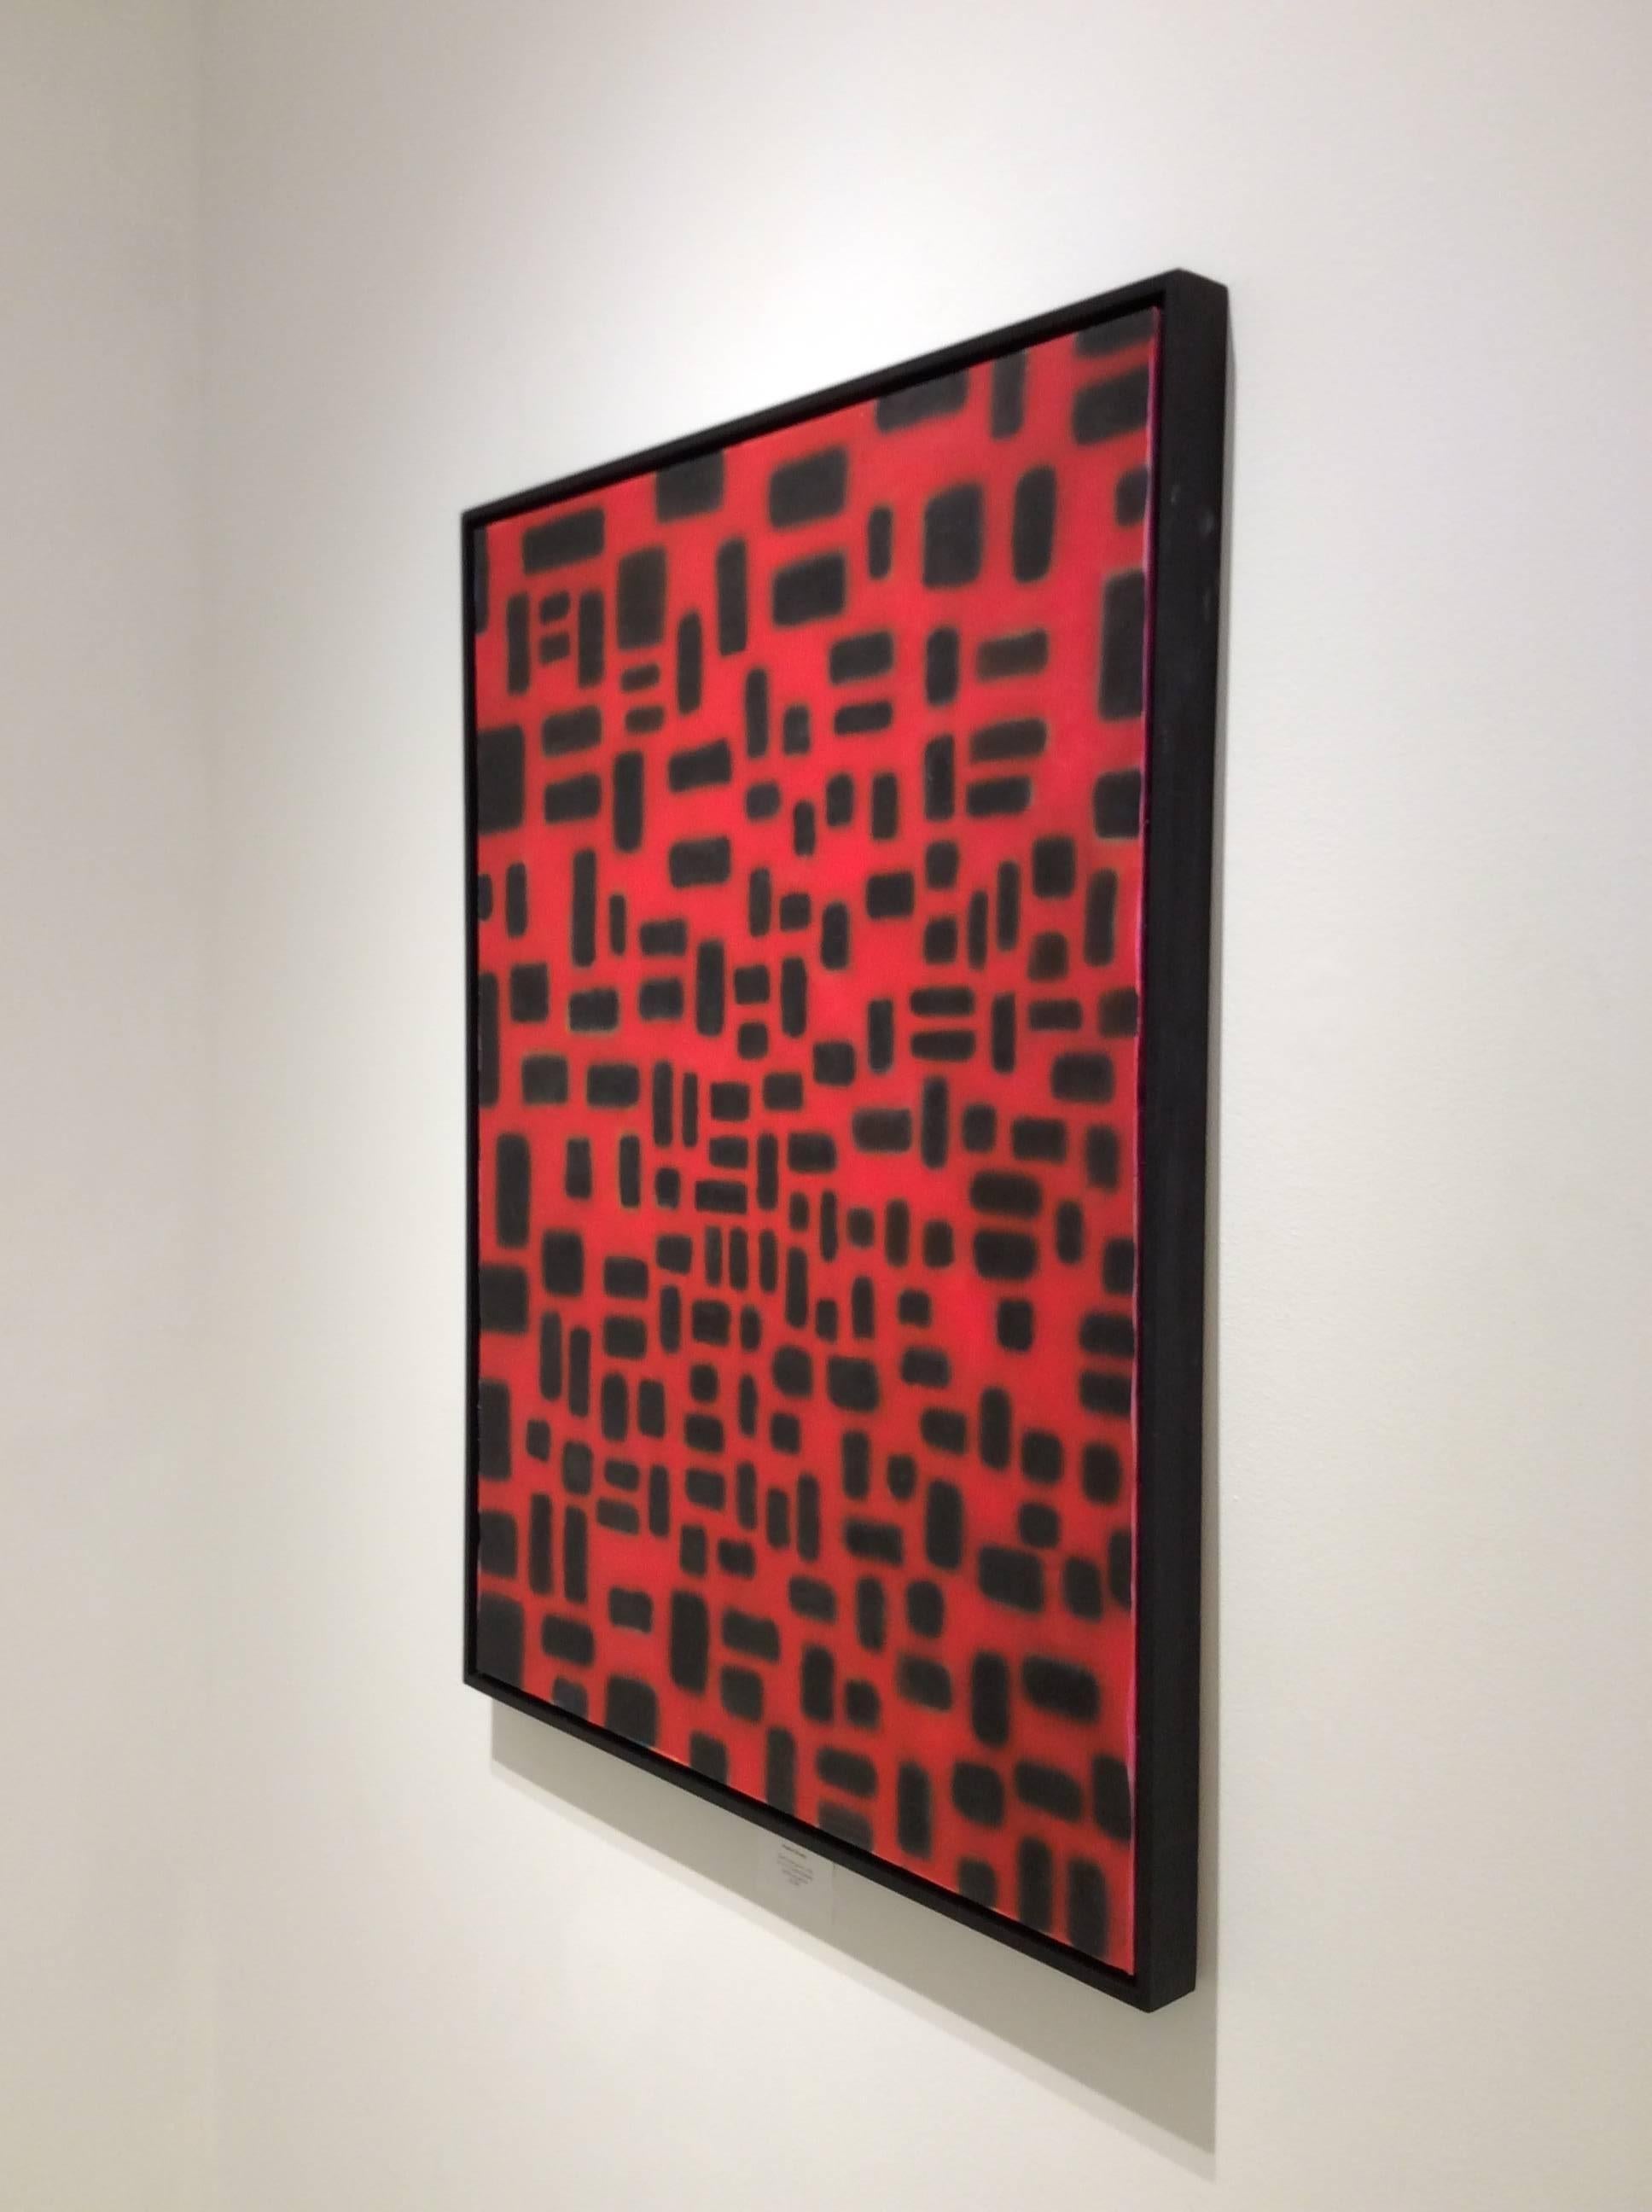 acrylic painting on canvas
40 x 30 inches in thin black painted wood frame

This boldly painted red and black abstract painting was completed by self-taught artist, Stephen Brophy, in 1994. After concentrating largely on landscapes and figurative